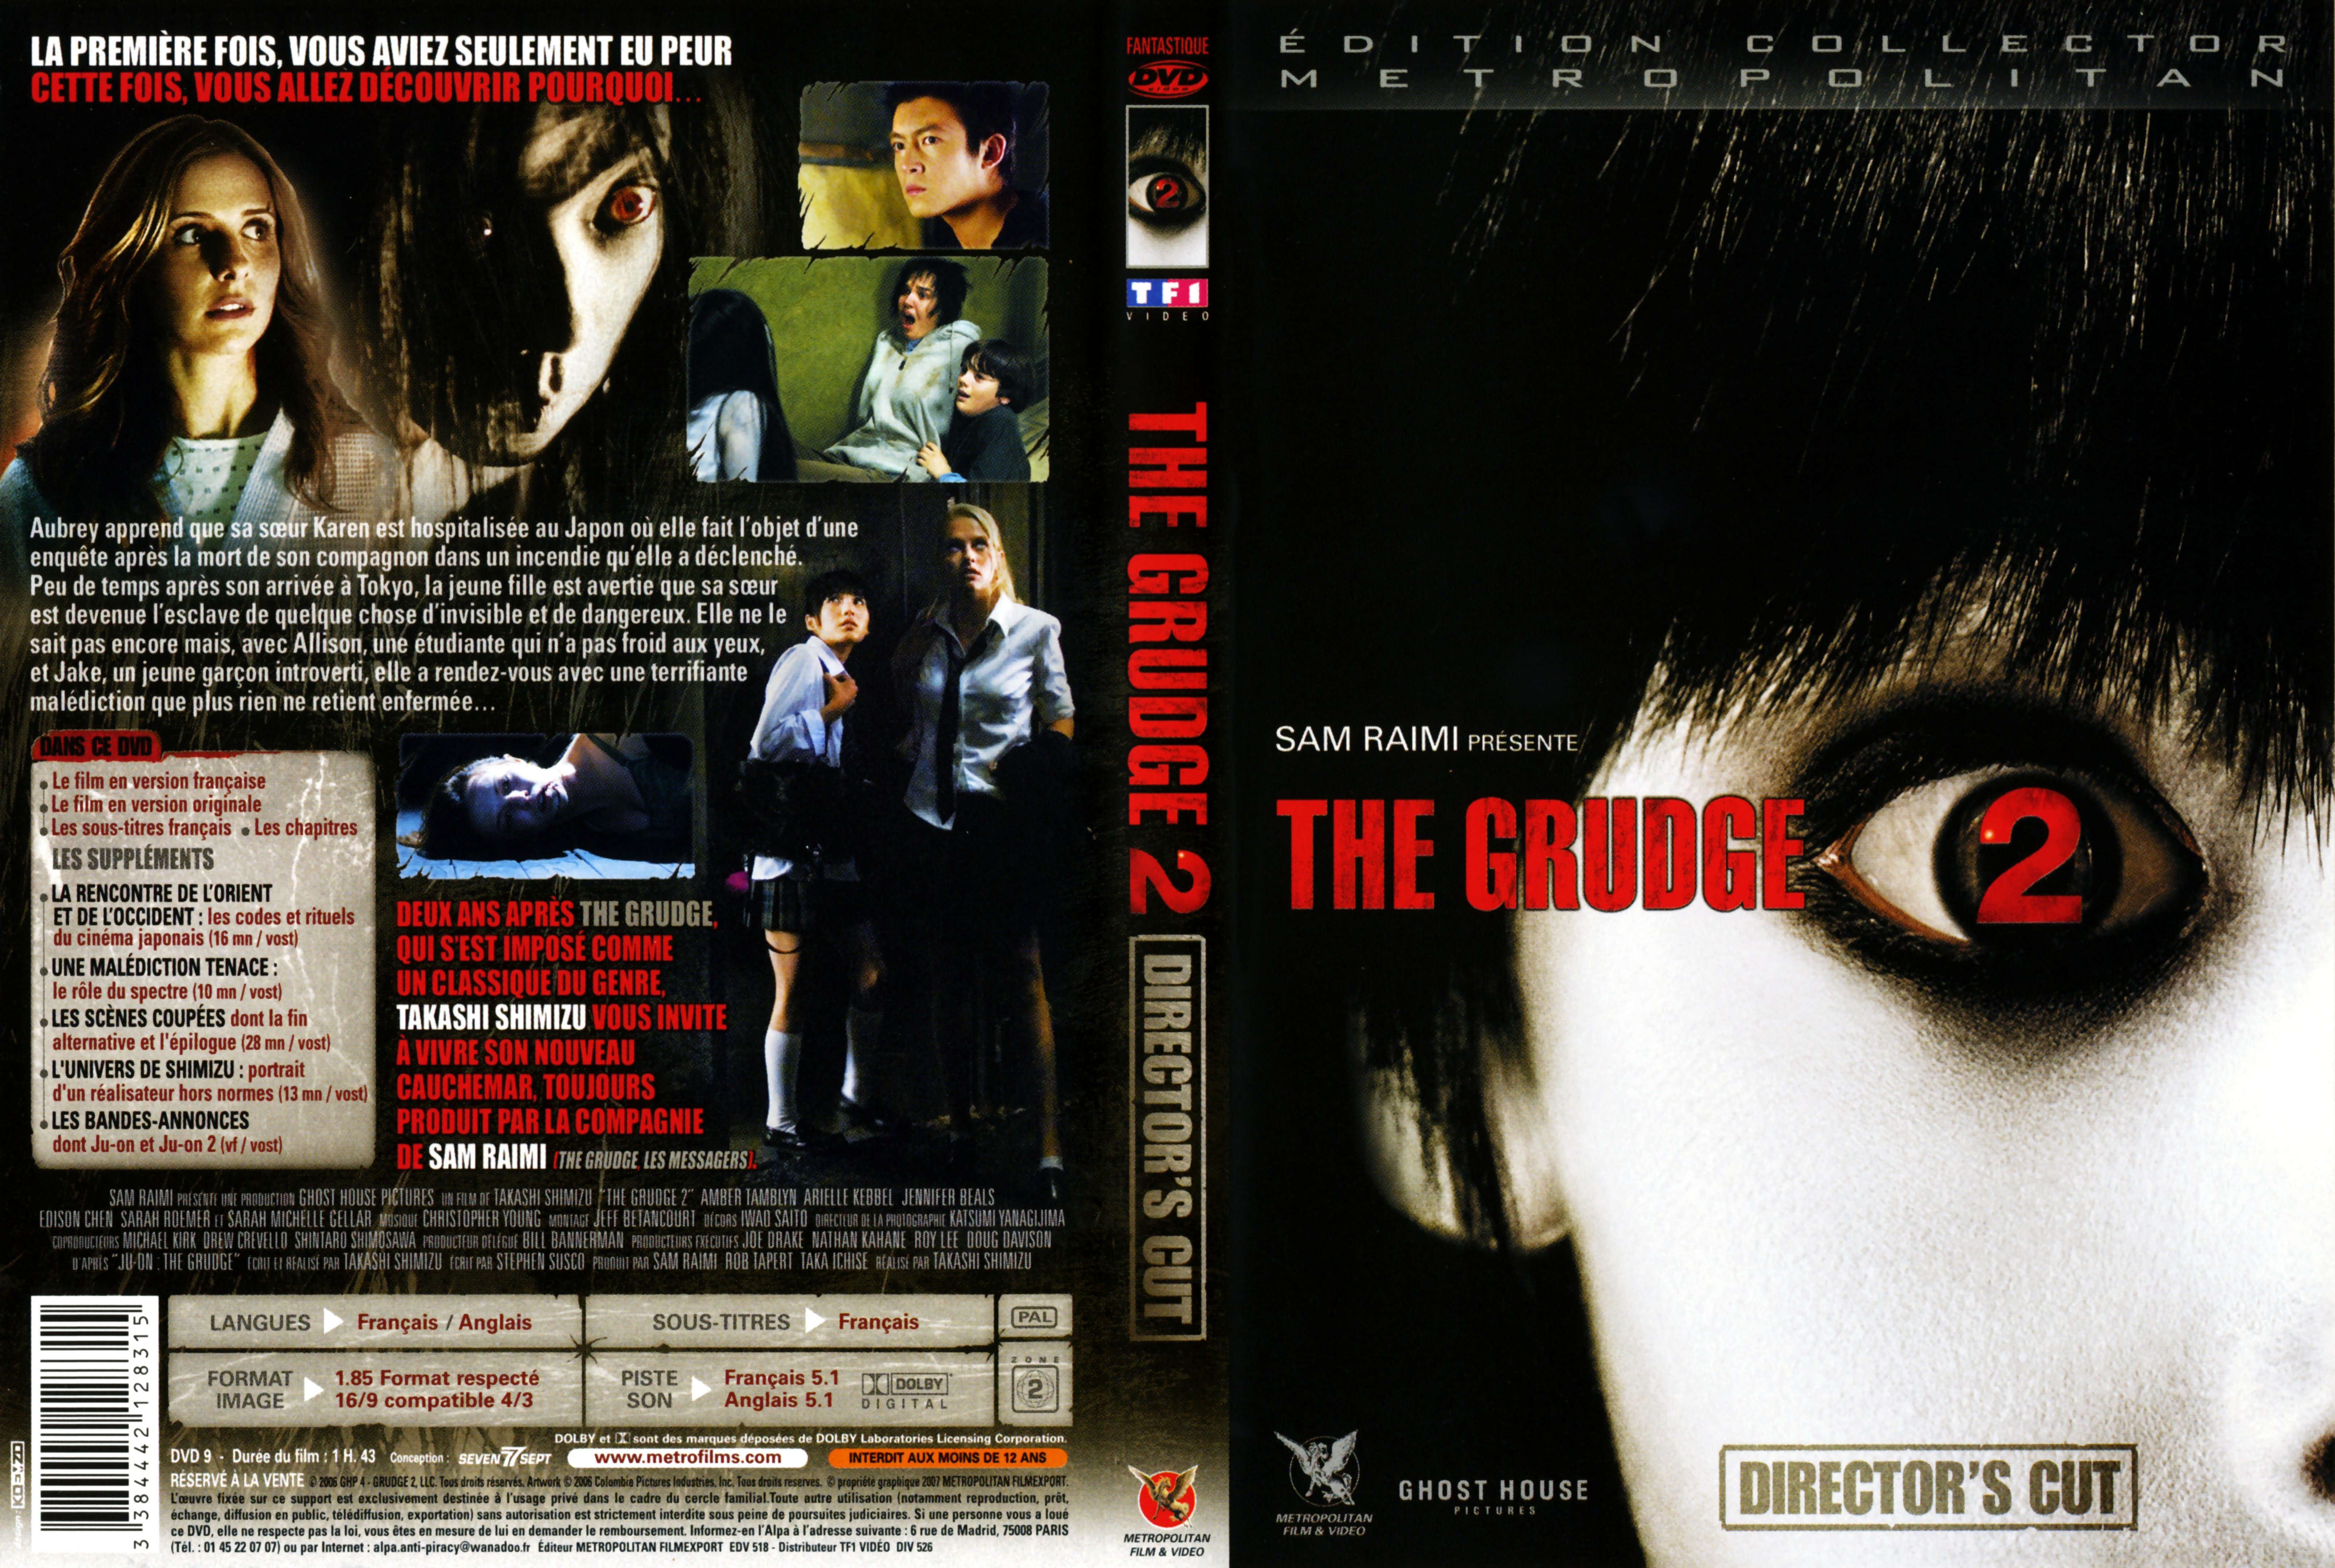 Jaquette DVD The Grudge 2 (2007) v2